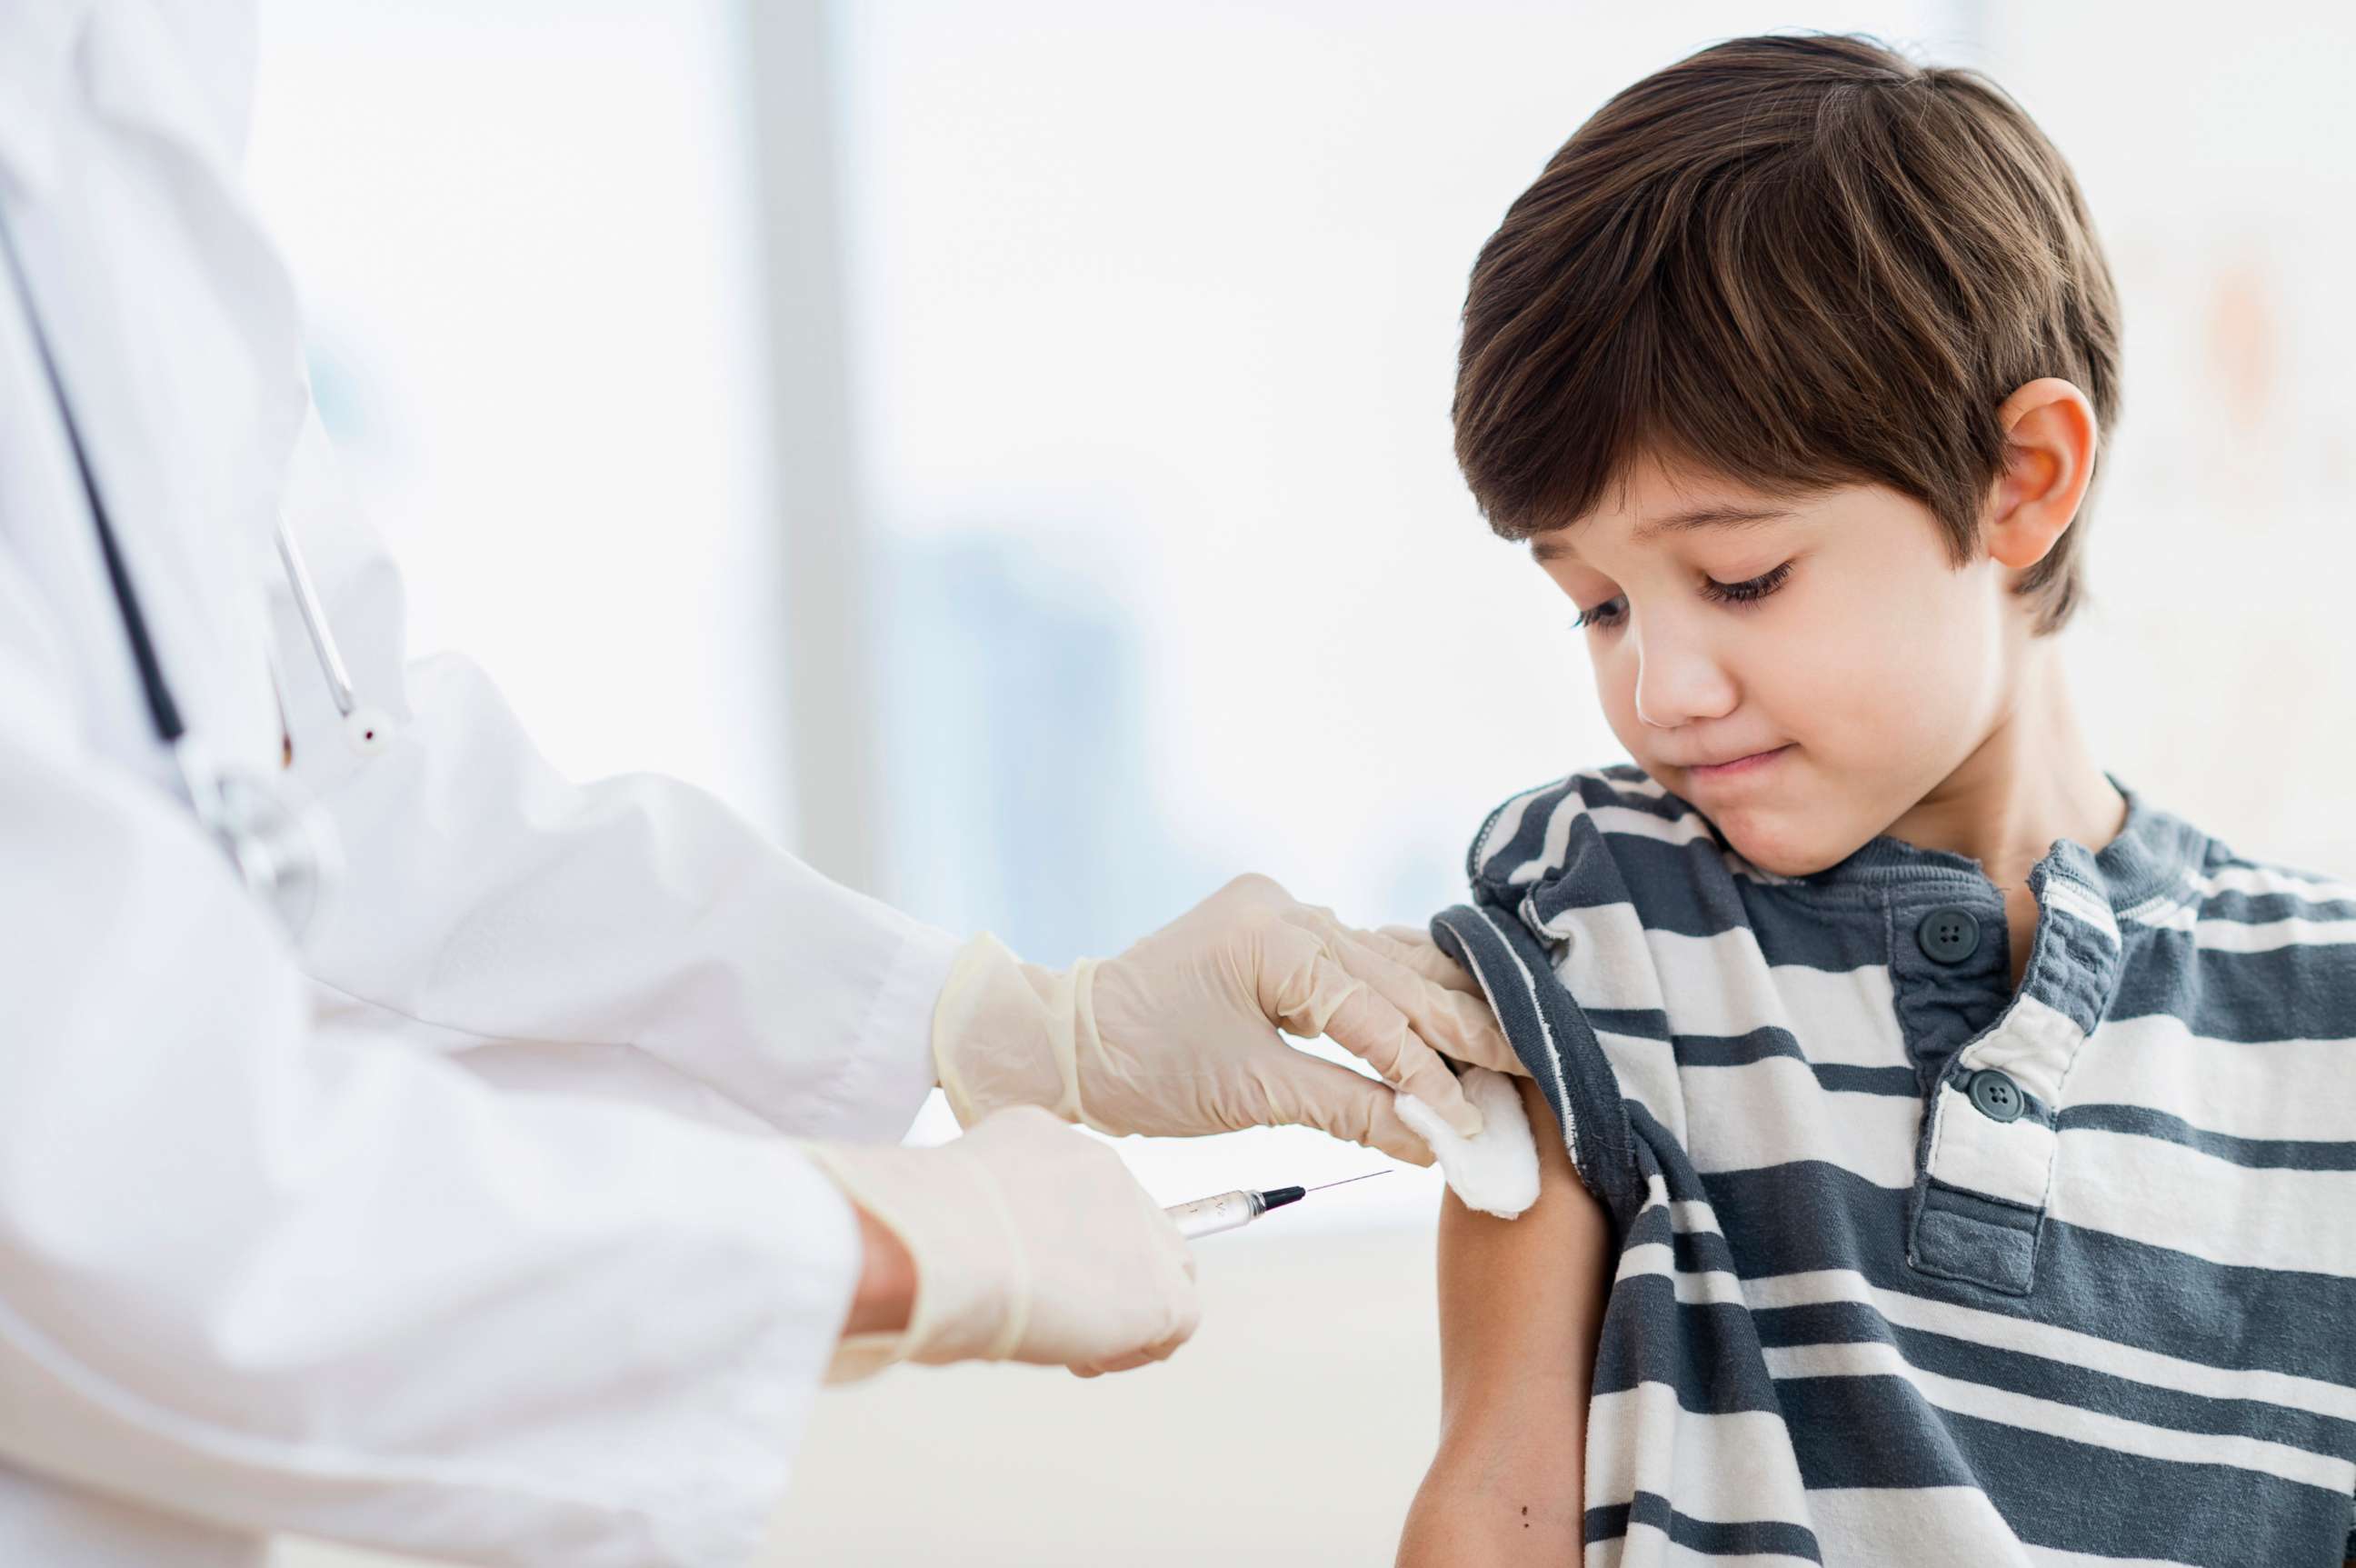 PHOTO: A boy is pictured getting a shot at doctor's office in this undated stock photo.